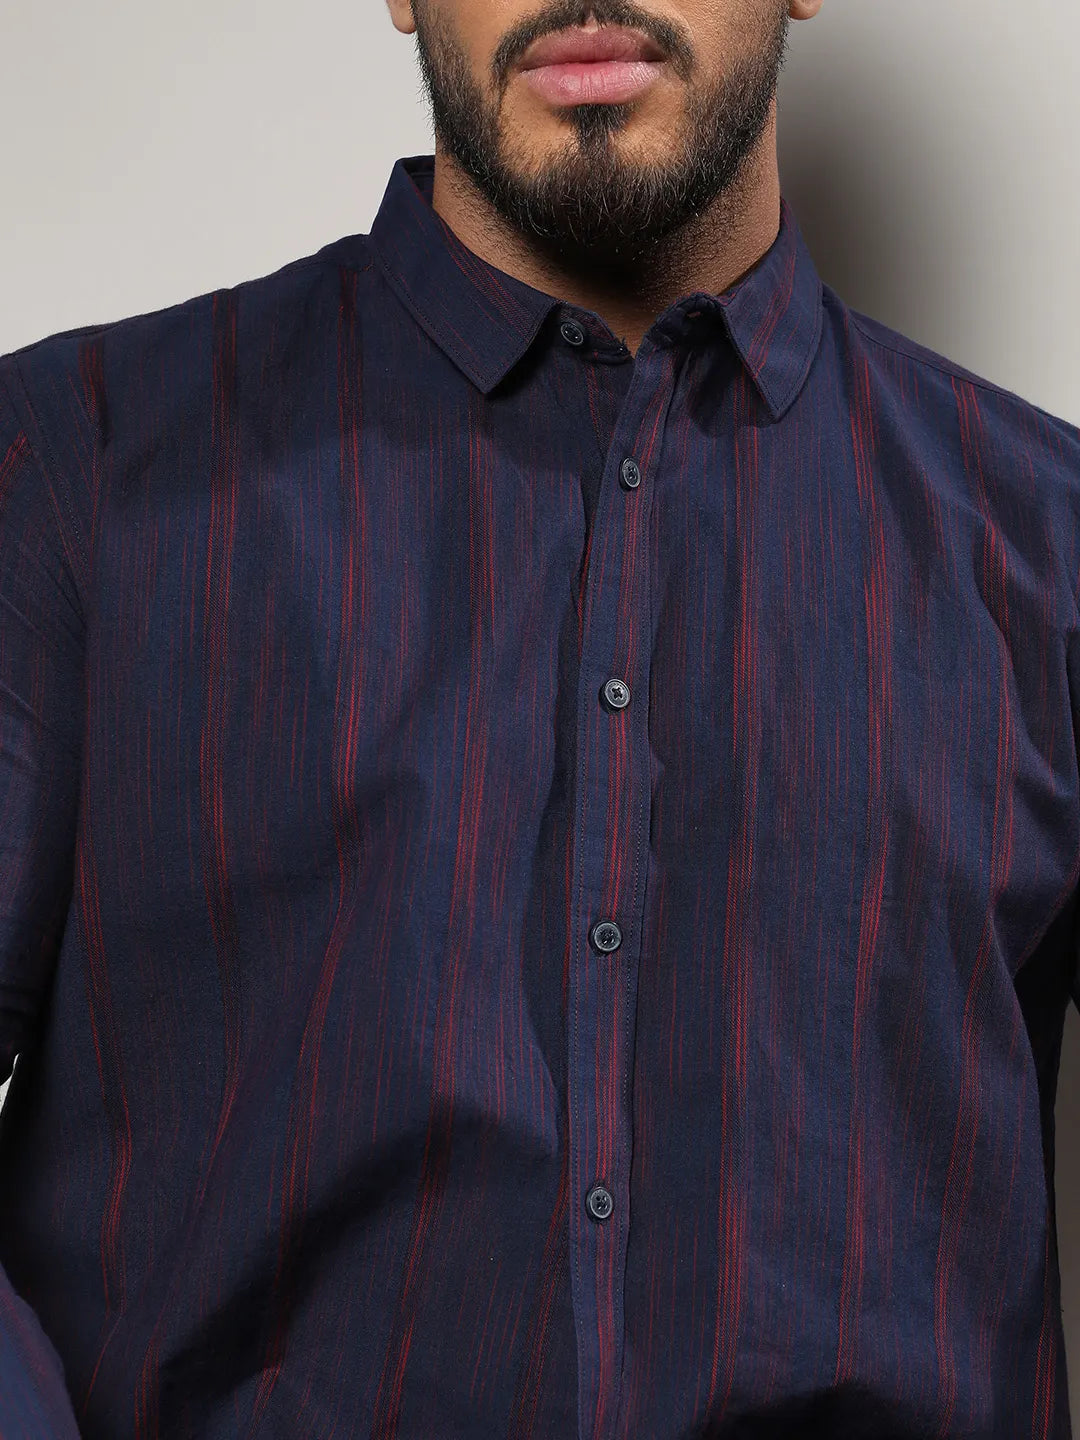 Navy Blue & Red Ombre Striped Shirt